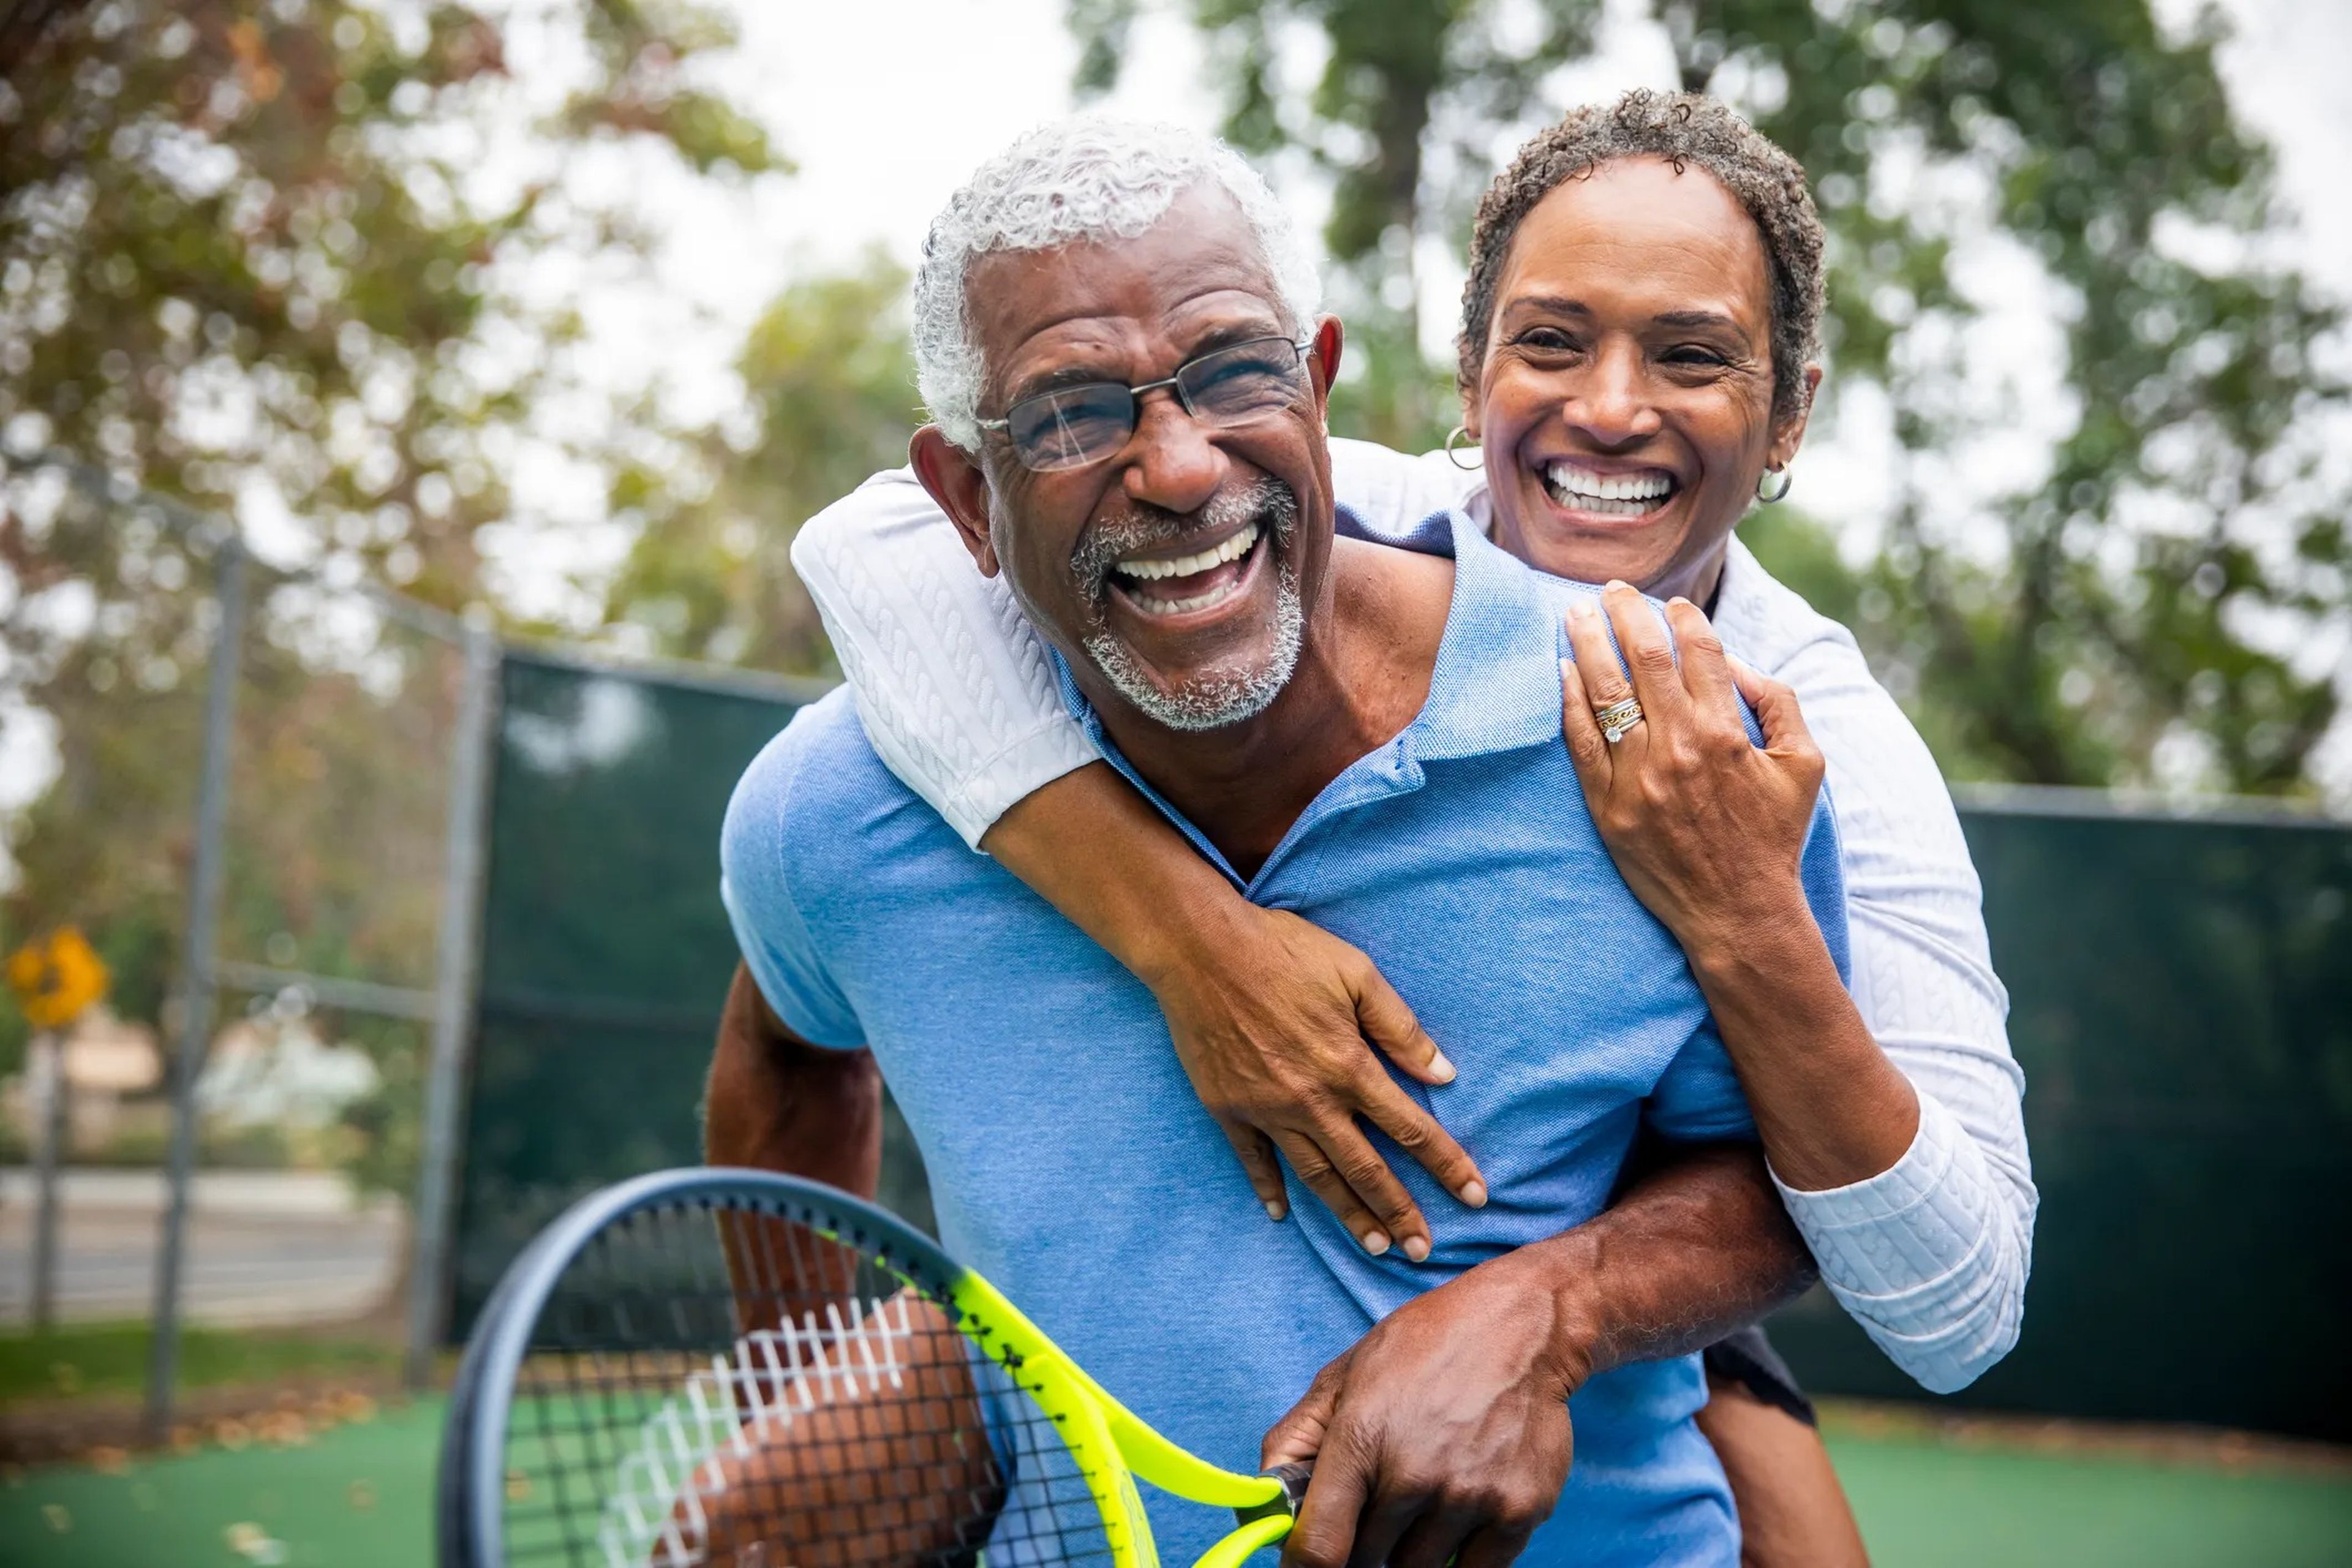 A couple with grey hair smiling on a tennis court.